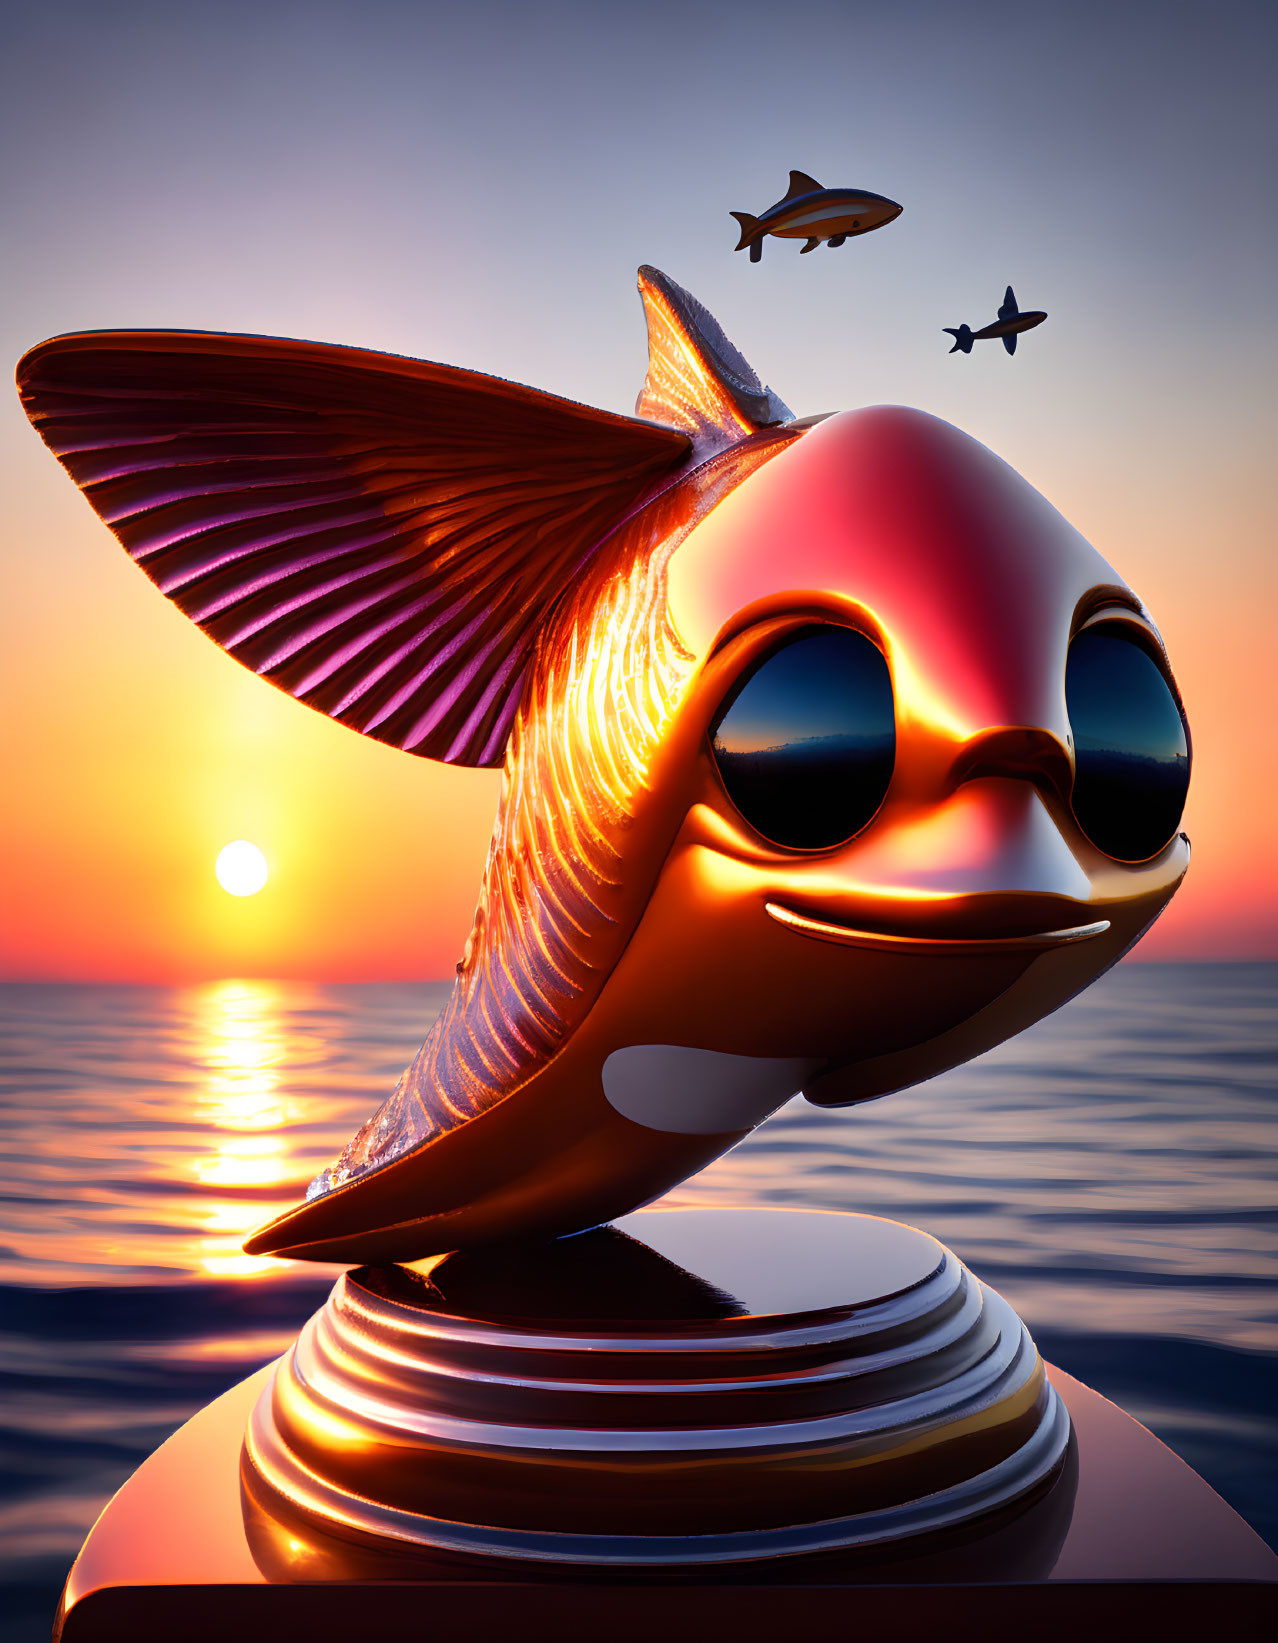 Goldfish Trophy with Sunglasses in Sunset Ocean Scene